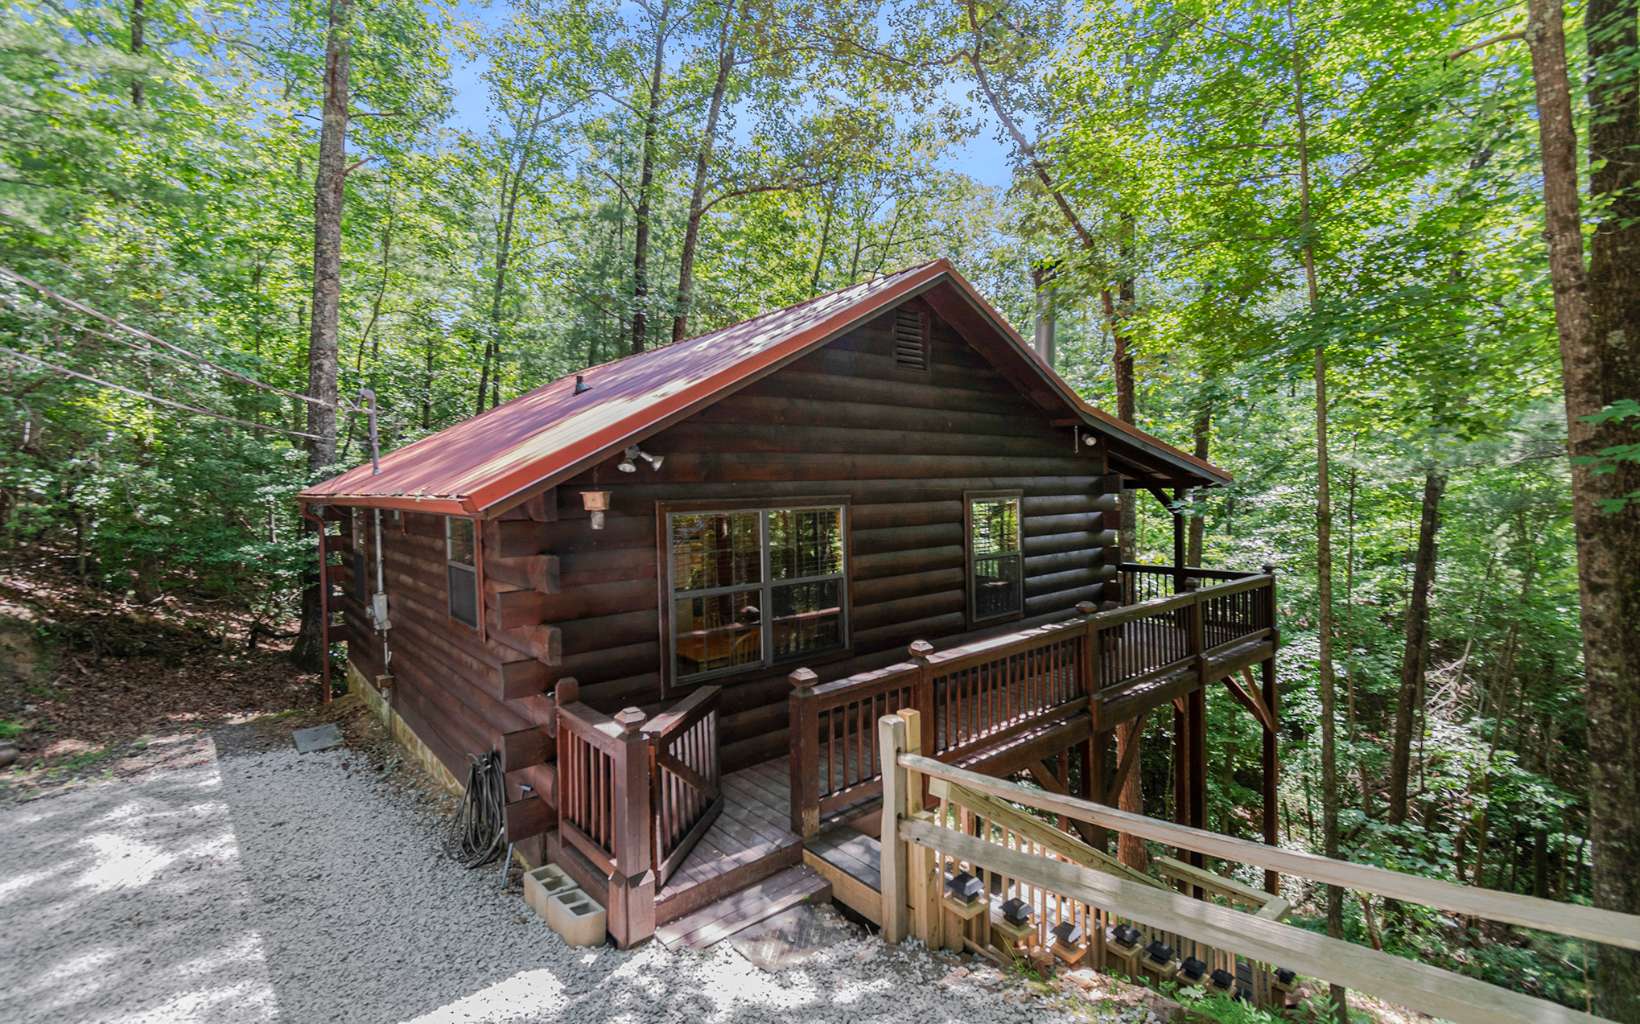 Perfectly situated between Downtown Blue Ridge and Ellijay GA, this SHORT TERM RENTAL ready cabin is waiting for you! A true sought after Sisson Log cabin offering 2 bedrooms and 1 full bath that is FULLY FURNISHED! Rental experts have given rental projections of nearly $50,000 a year with 230 nights expected to be rented. Open floor plan with wood burning rock fireplace. Brand new roof and gravel on the driveway. Covered deck across the back of the cabin to enjoy the nature that surrounds you. Plenty of storage space in the stand up crawl space. Nearby North Georgia amenities include wineries, hiking, mountain biking, fishing, and more! It is being sold furnished and is ready to go!